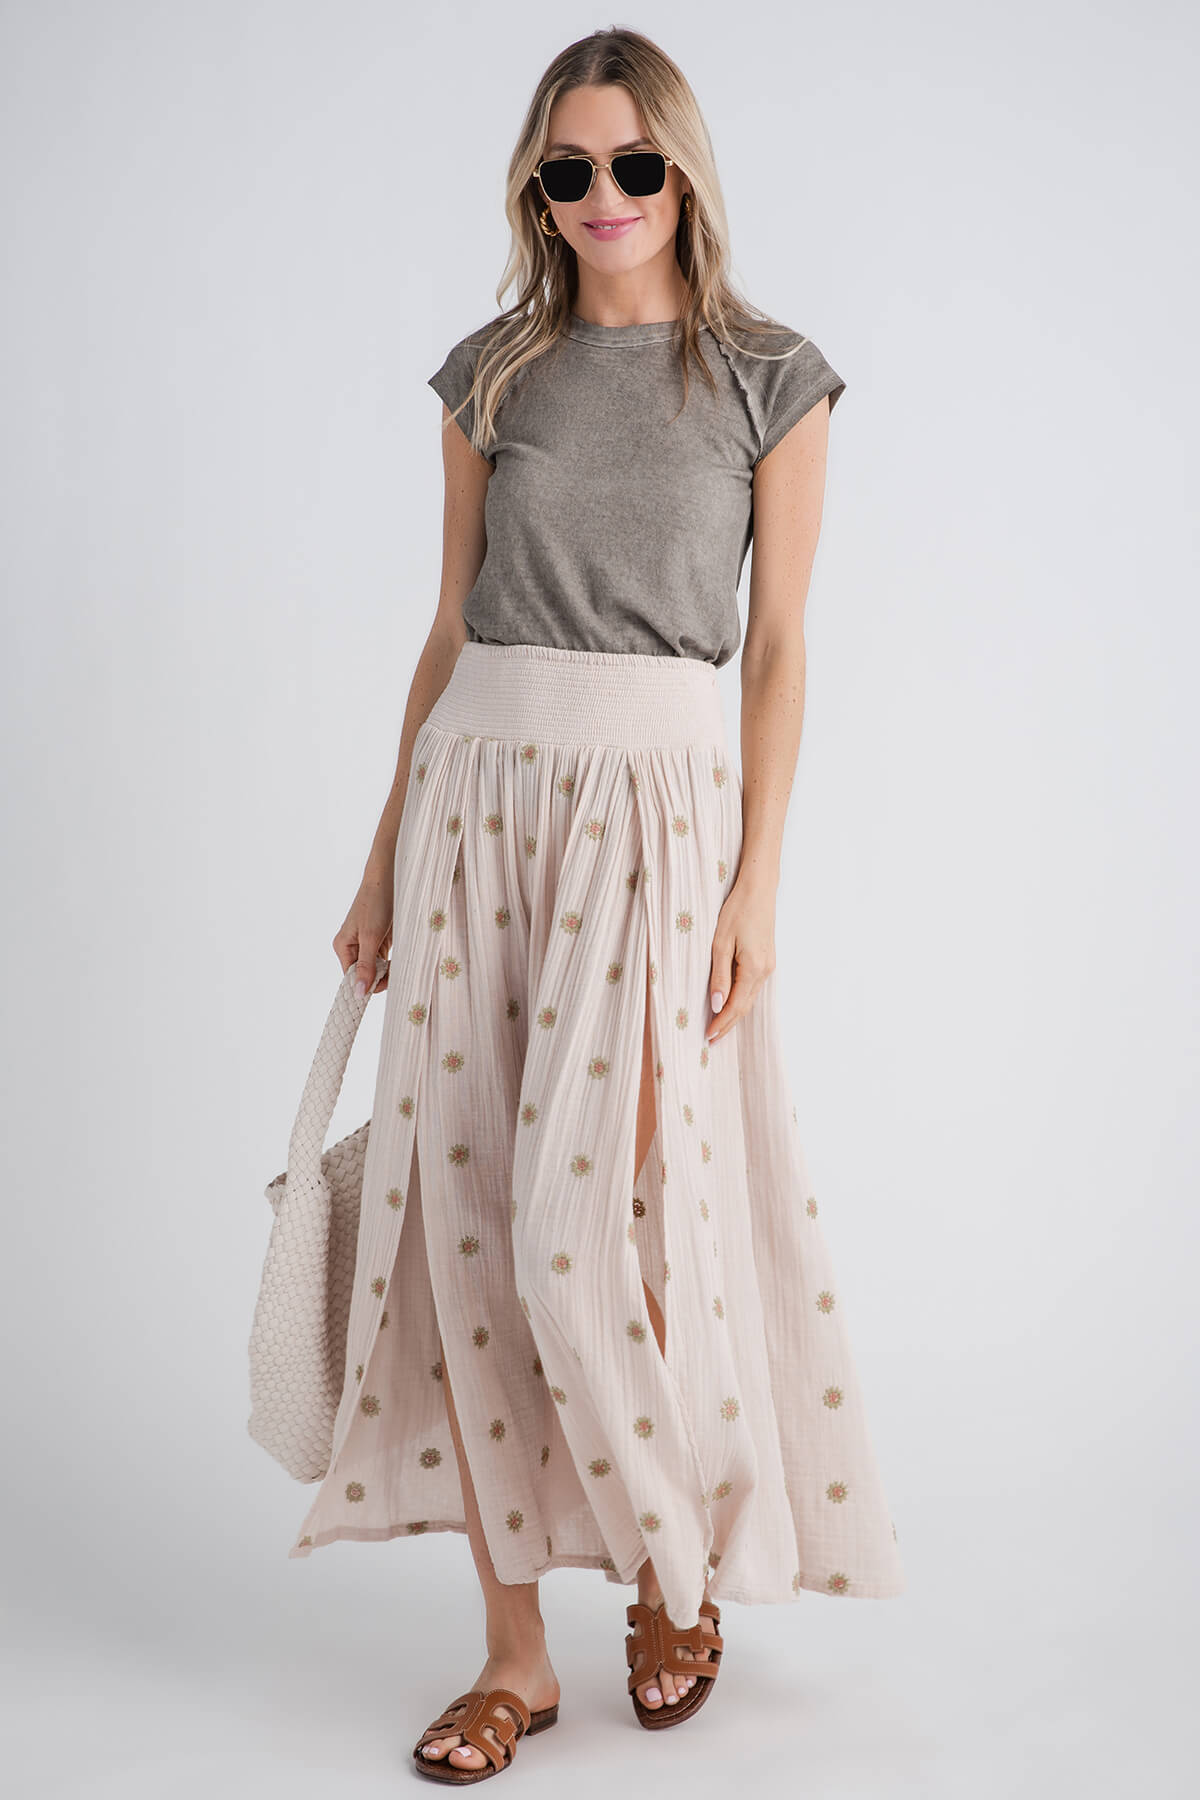 Free People Real Love Maxi Skirt